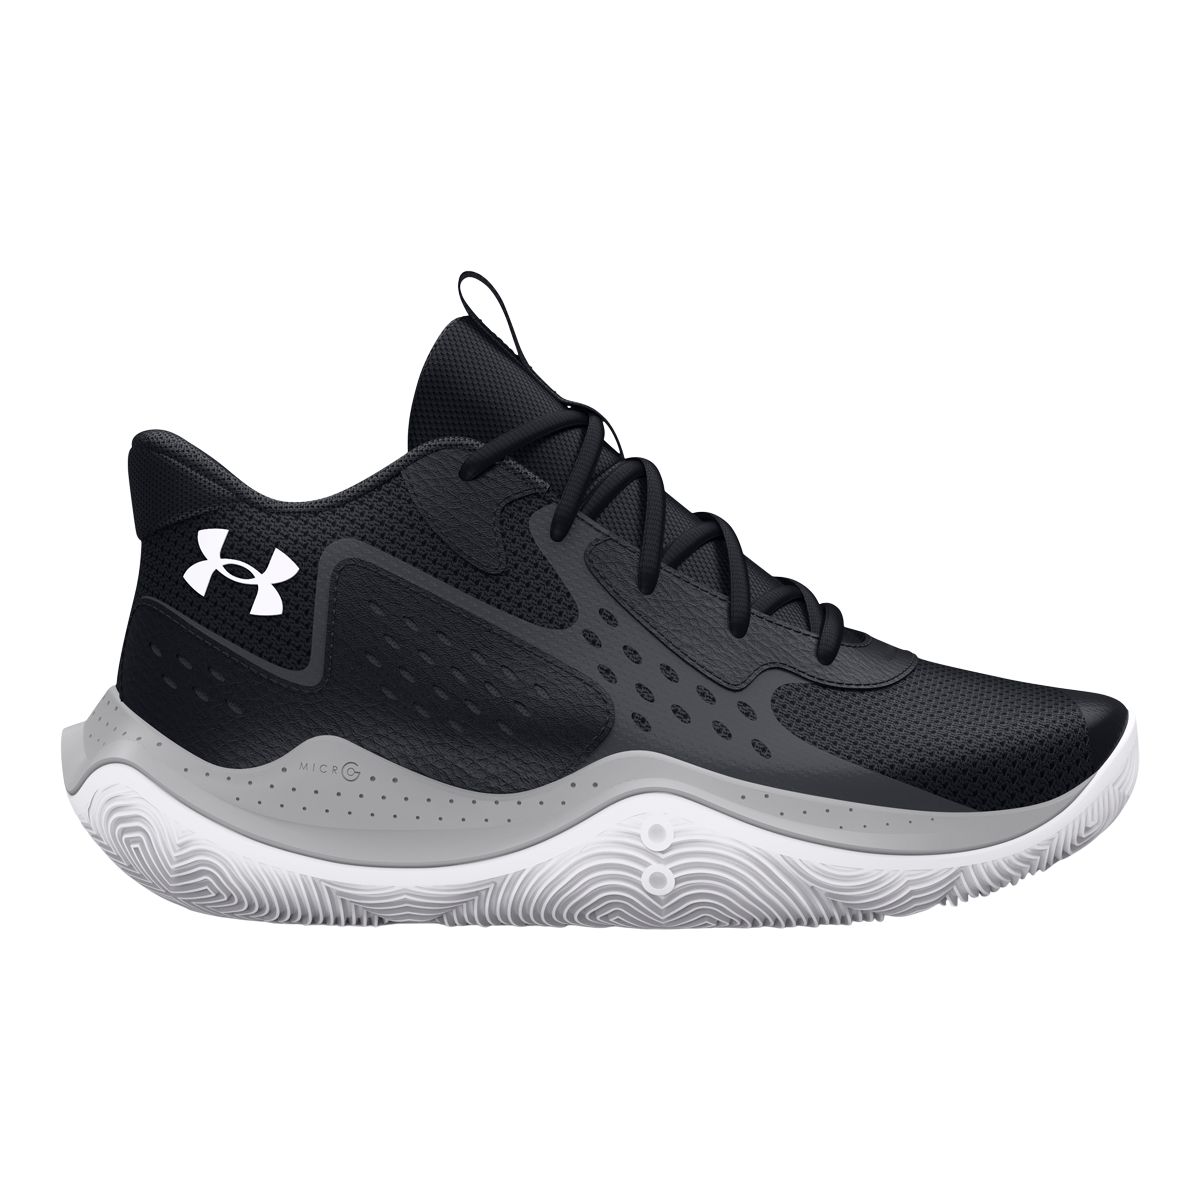 UNDER ARMOUR SPAWN 3 BASKETBALL SHOES MEN'S SIZE 6.5 WOMEN'S SIZE